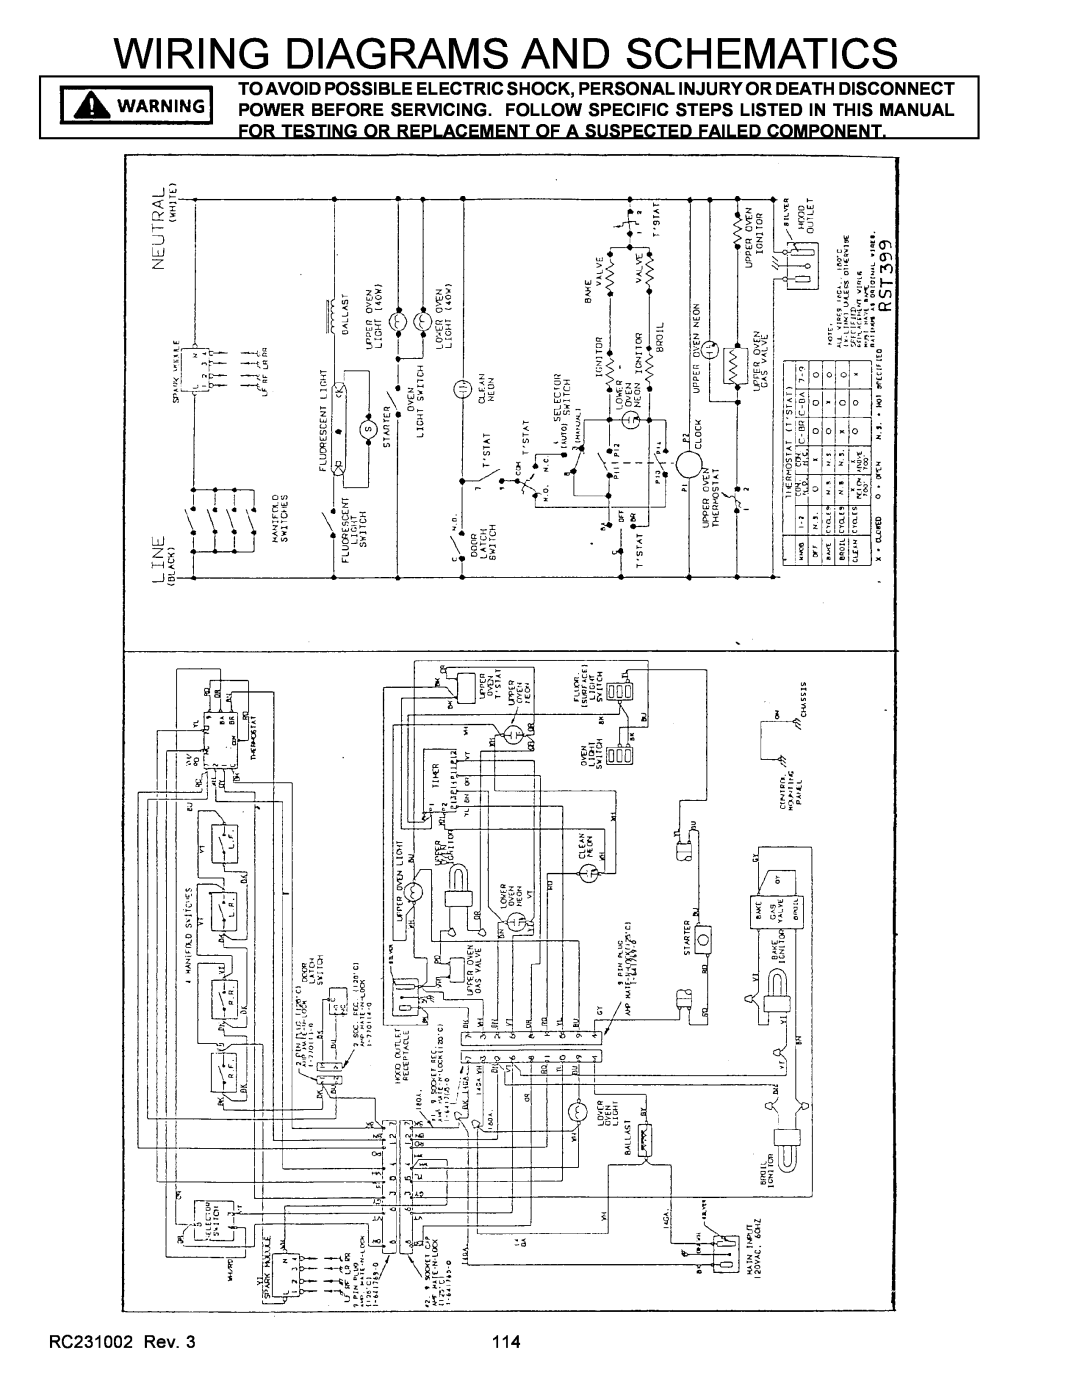 Amana RST, RSS service manual Wiring Diagrams And Schematics, RC231002 Rev 